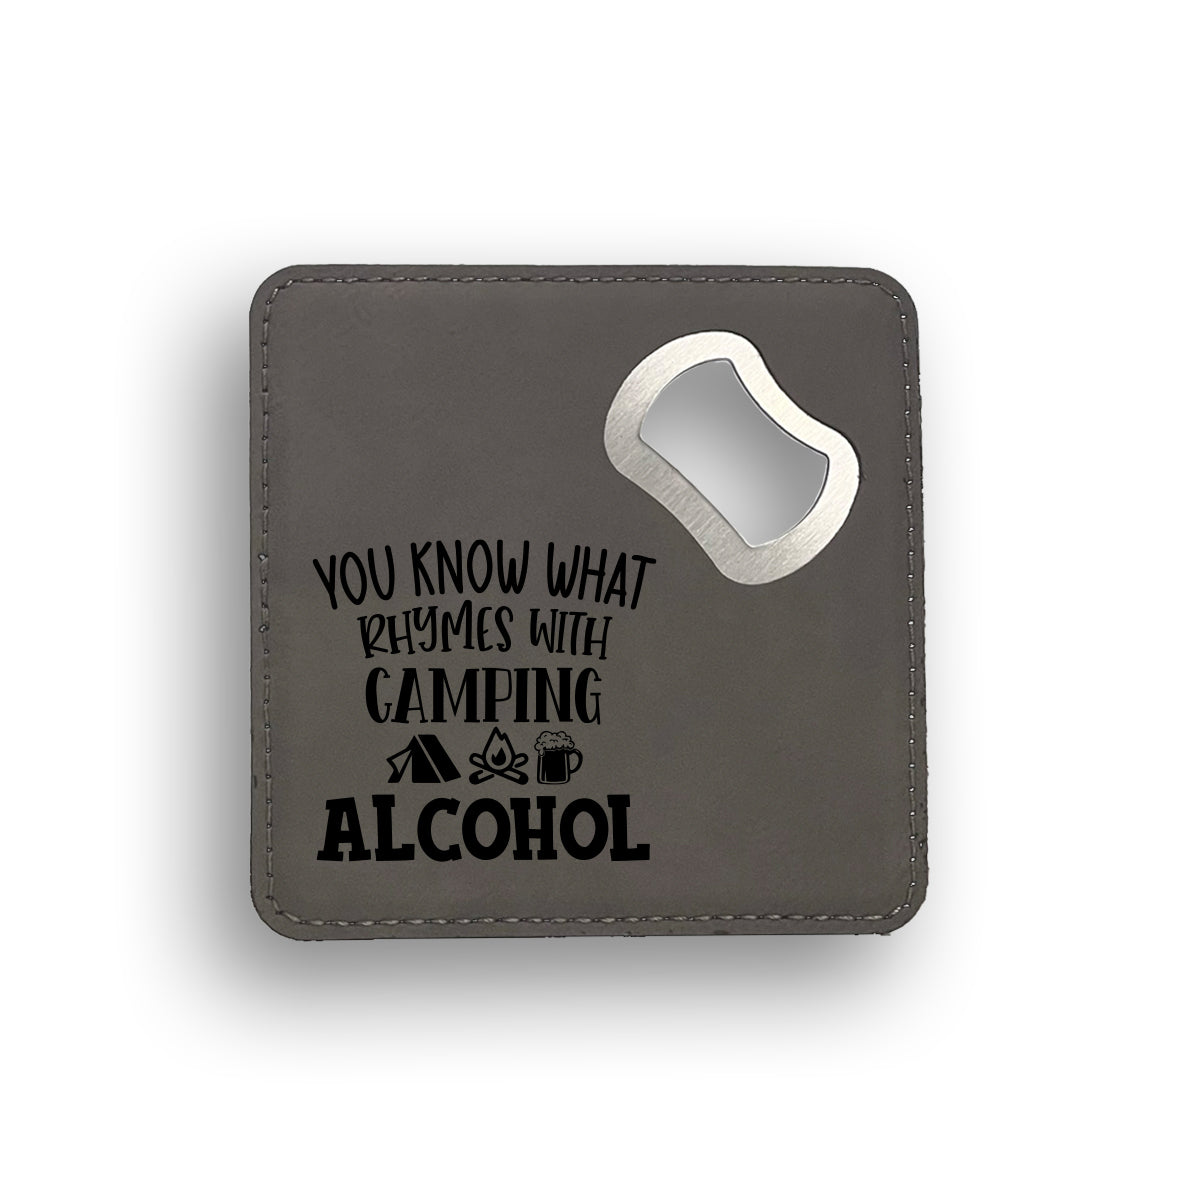 Rhymes With Camping Bottle Opener Coaster